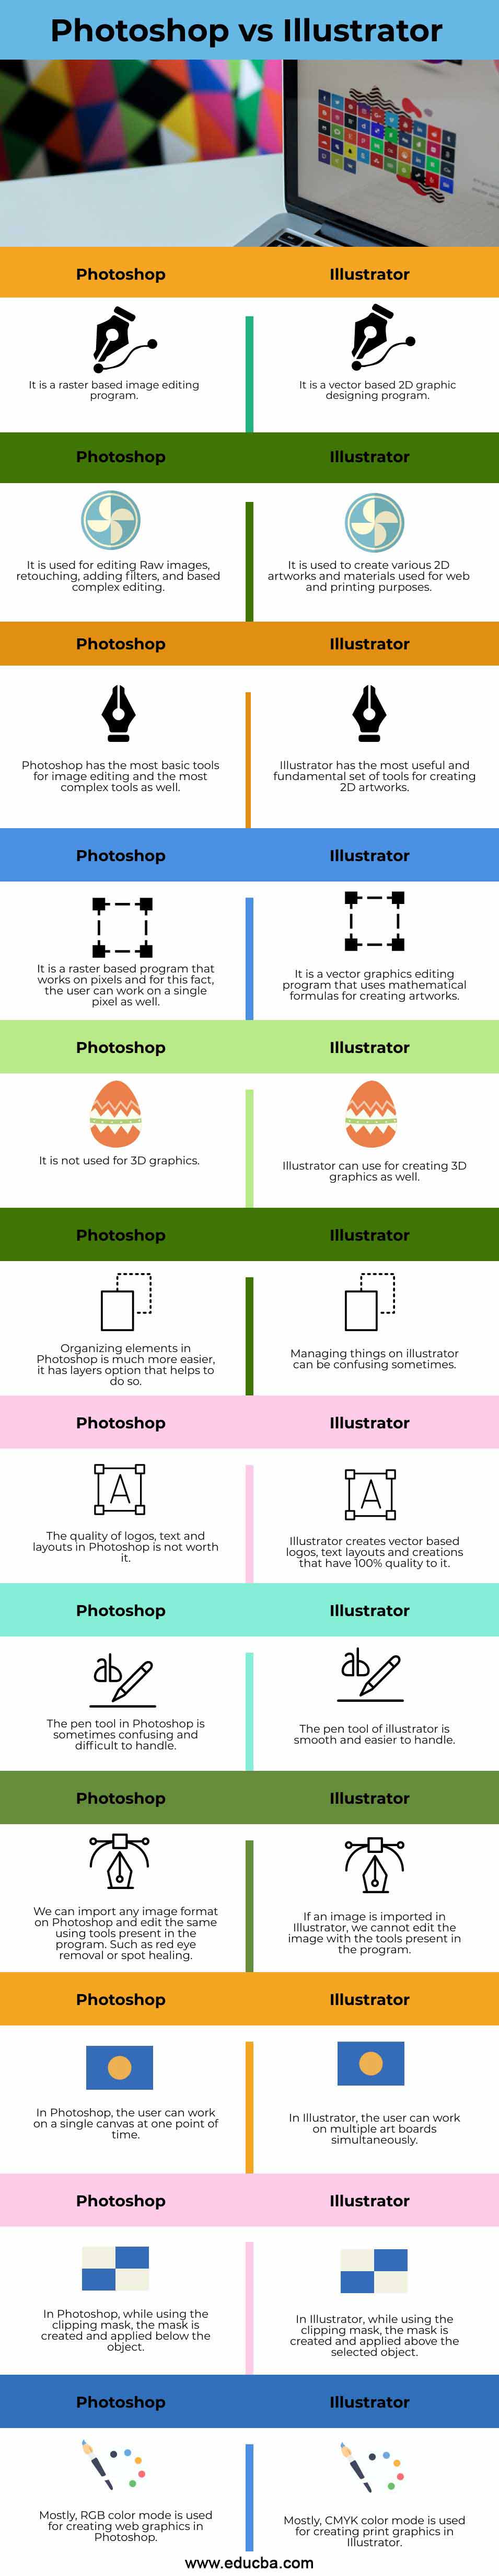 what are things photoshop is used for compared to adobe illustrator